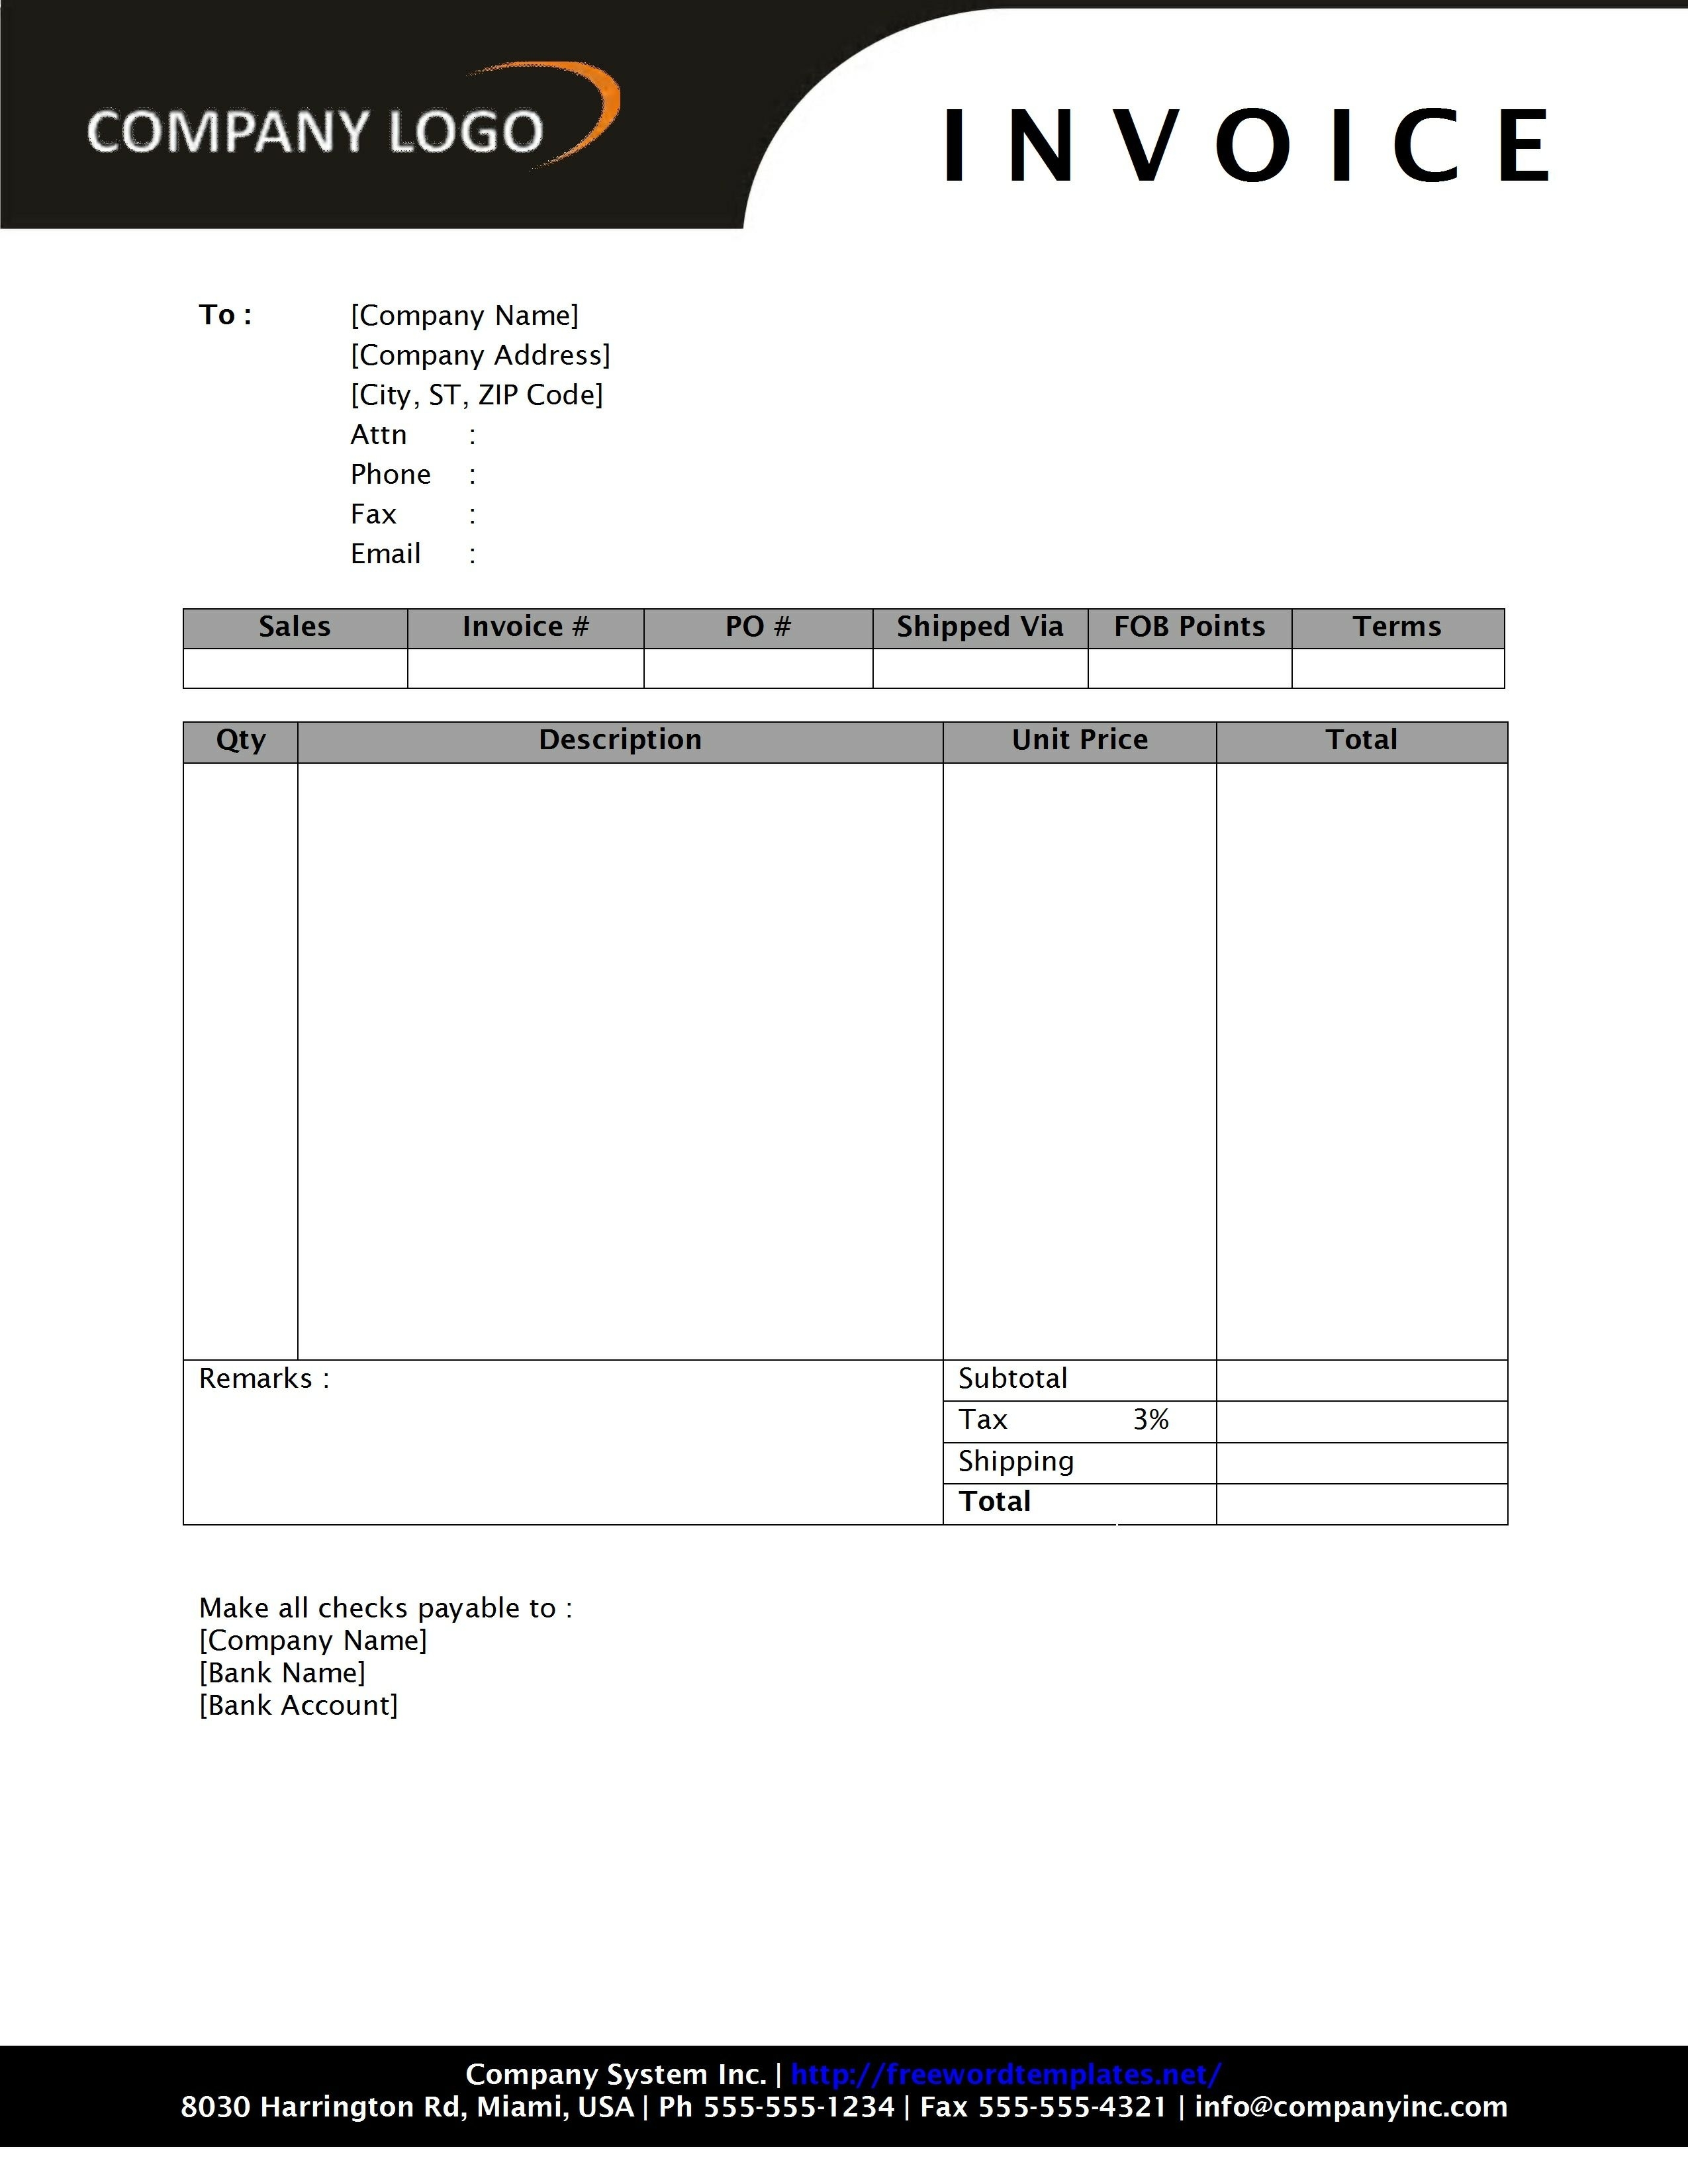 download free invoice template for invoice free download invoice template free 2016 2550 X 3300